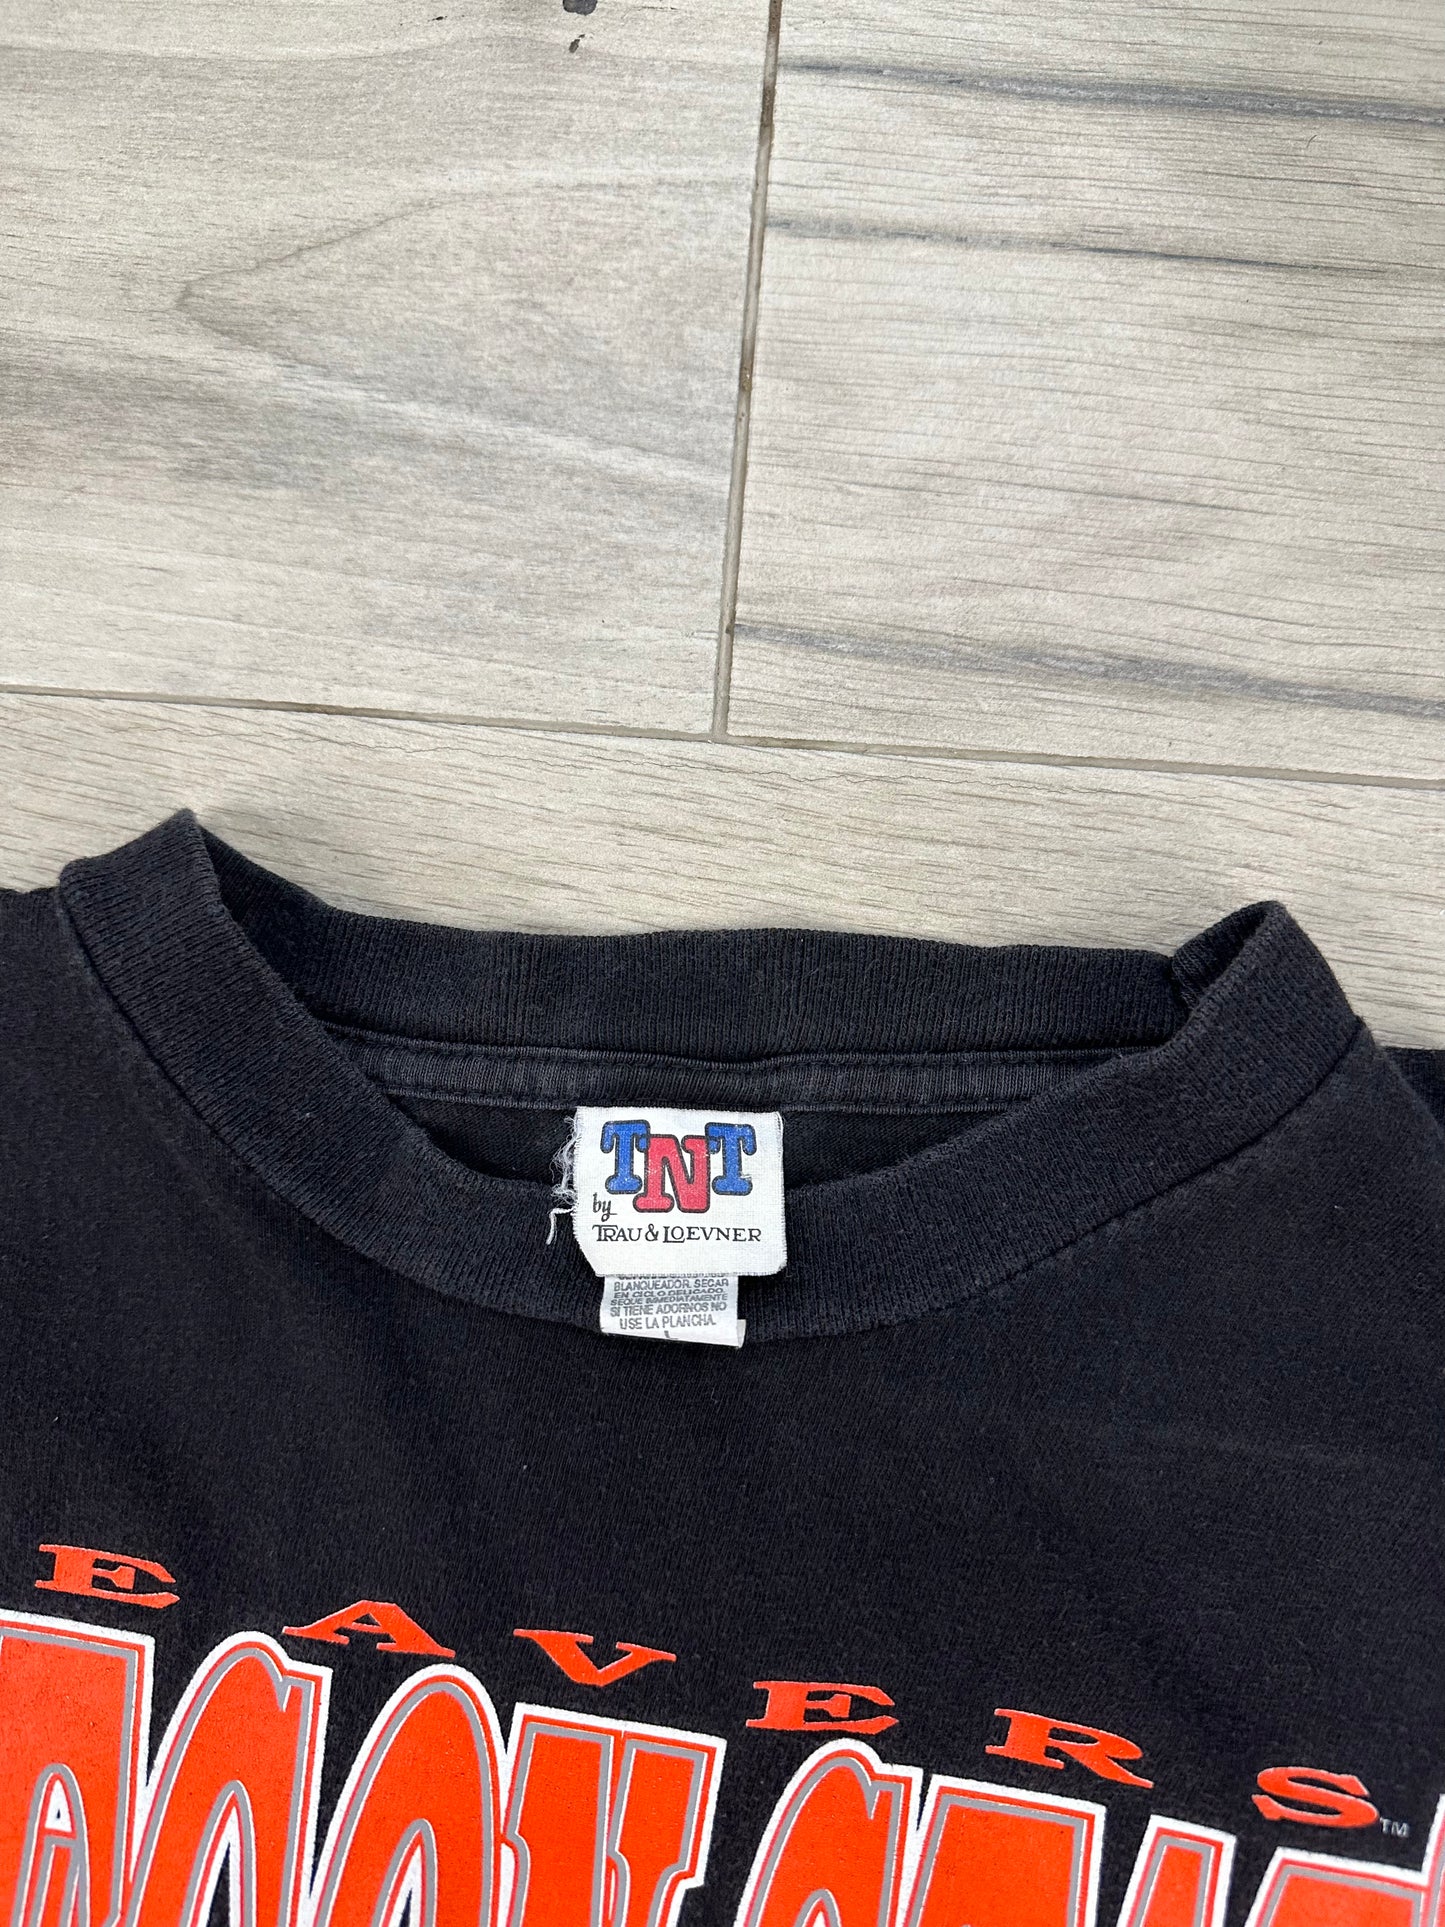 Oregon State Single Stitch Tee- CROPPED L (small length)